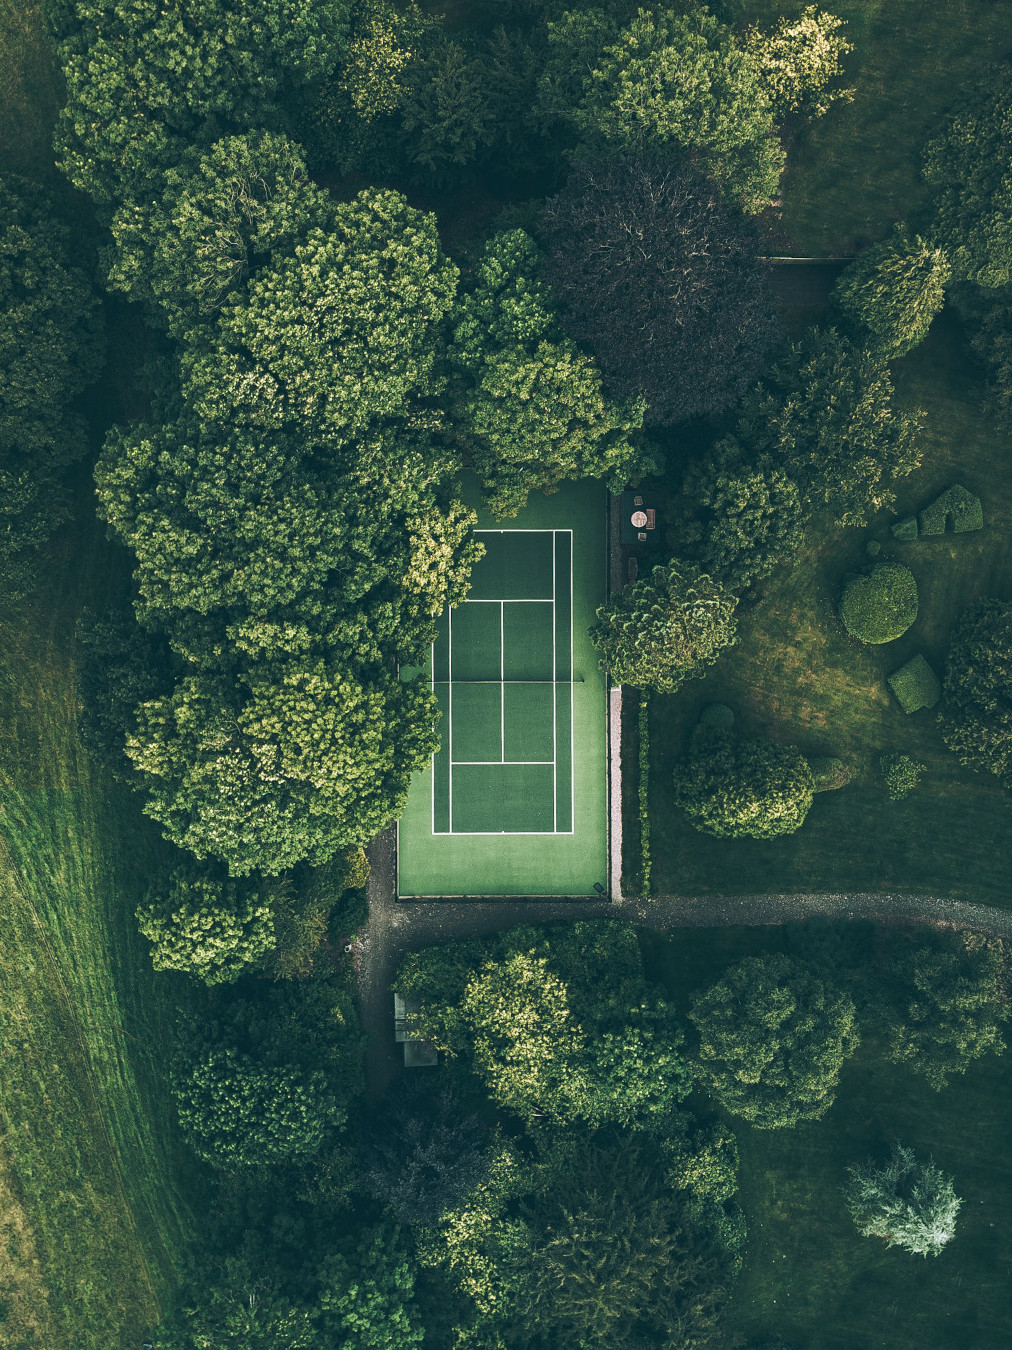 Join the exclusive tennis community